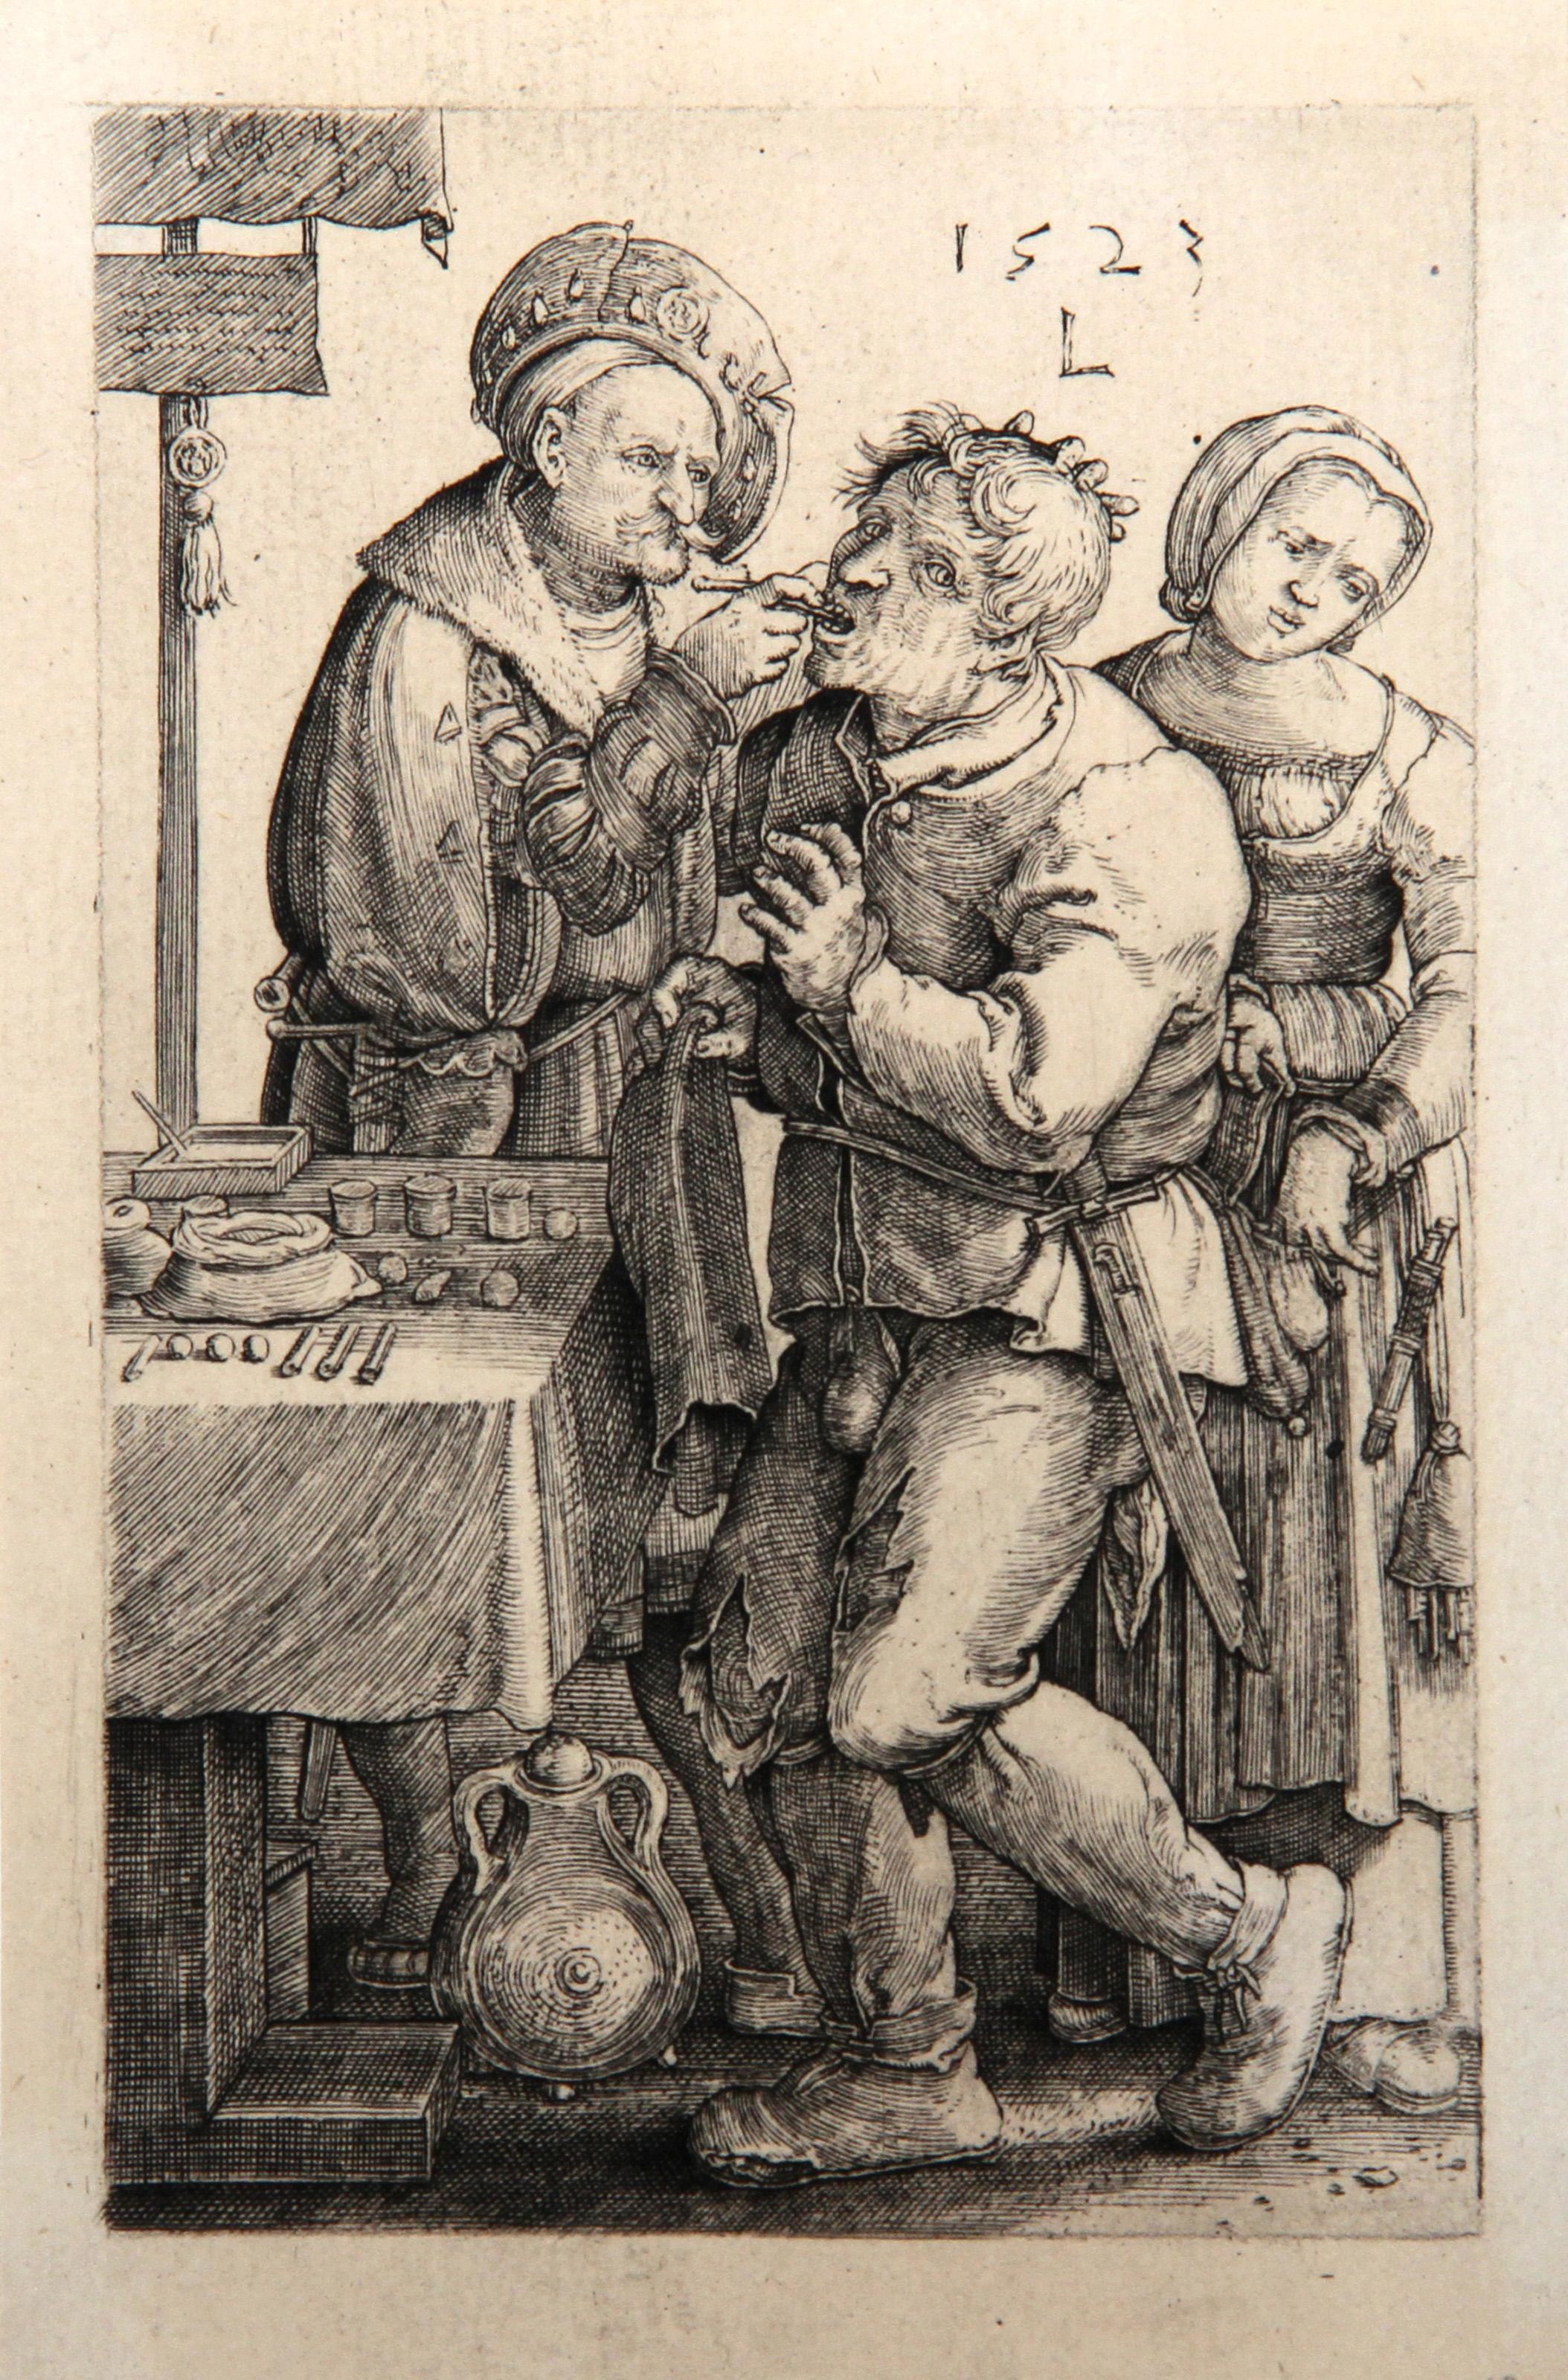 Artist: Lucas van Leyden, After by Amand Durand, Dutch (1494 - 1533) - l'Operateur, Year: 1873, Medium: Heliogravure, Size: 5.25  x 3.5 in. (13.34  x 8.89 cm), Printer: Amand Durand, Description: French Engraver and painter Charles Amand Durand,